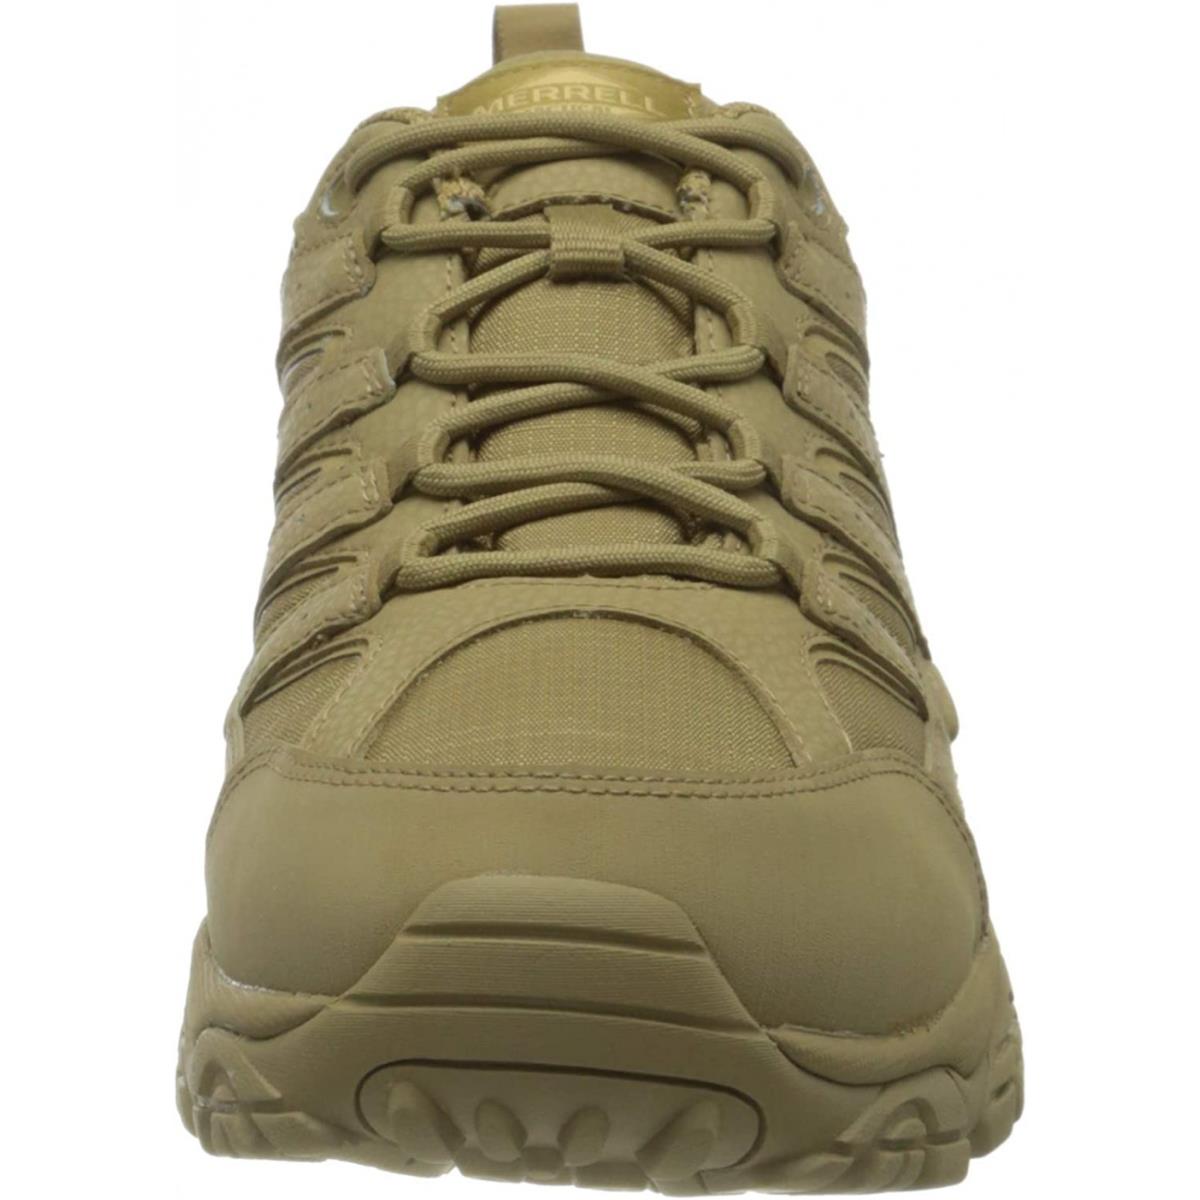 Merrell Men`s Moab 2 Tactical Hiking-shoes - Coyote